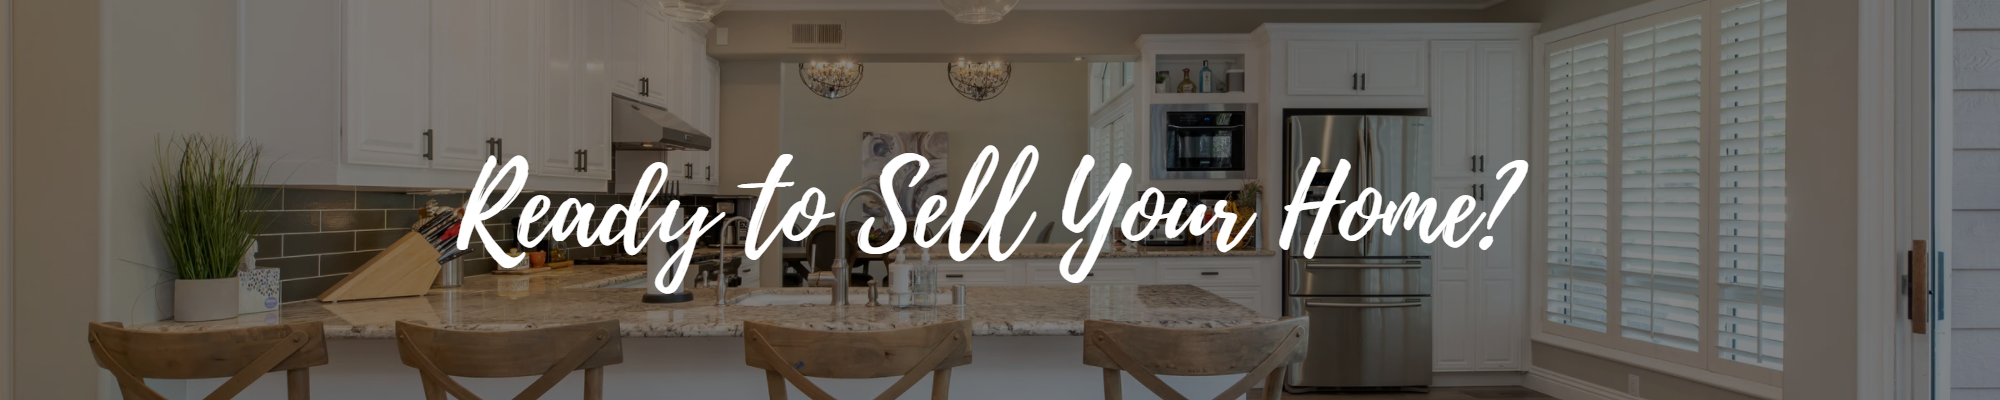 Ready to Sell your Home